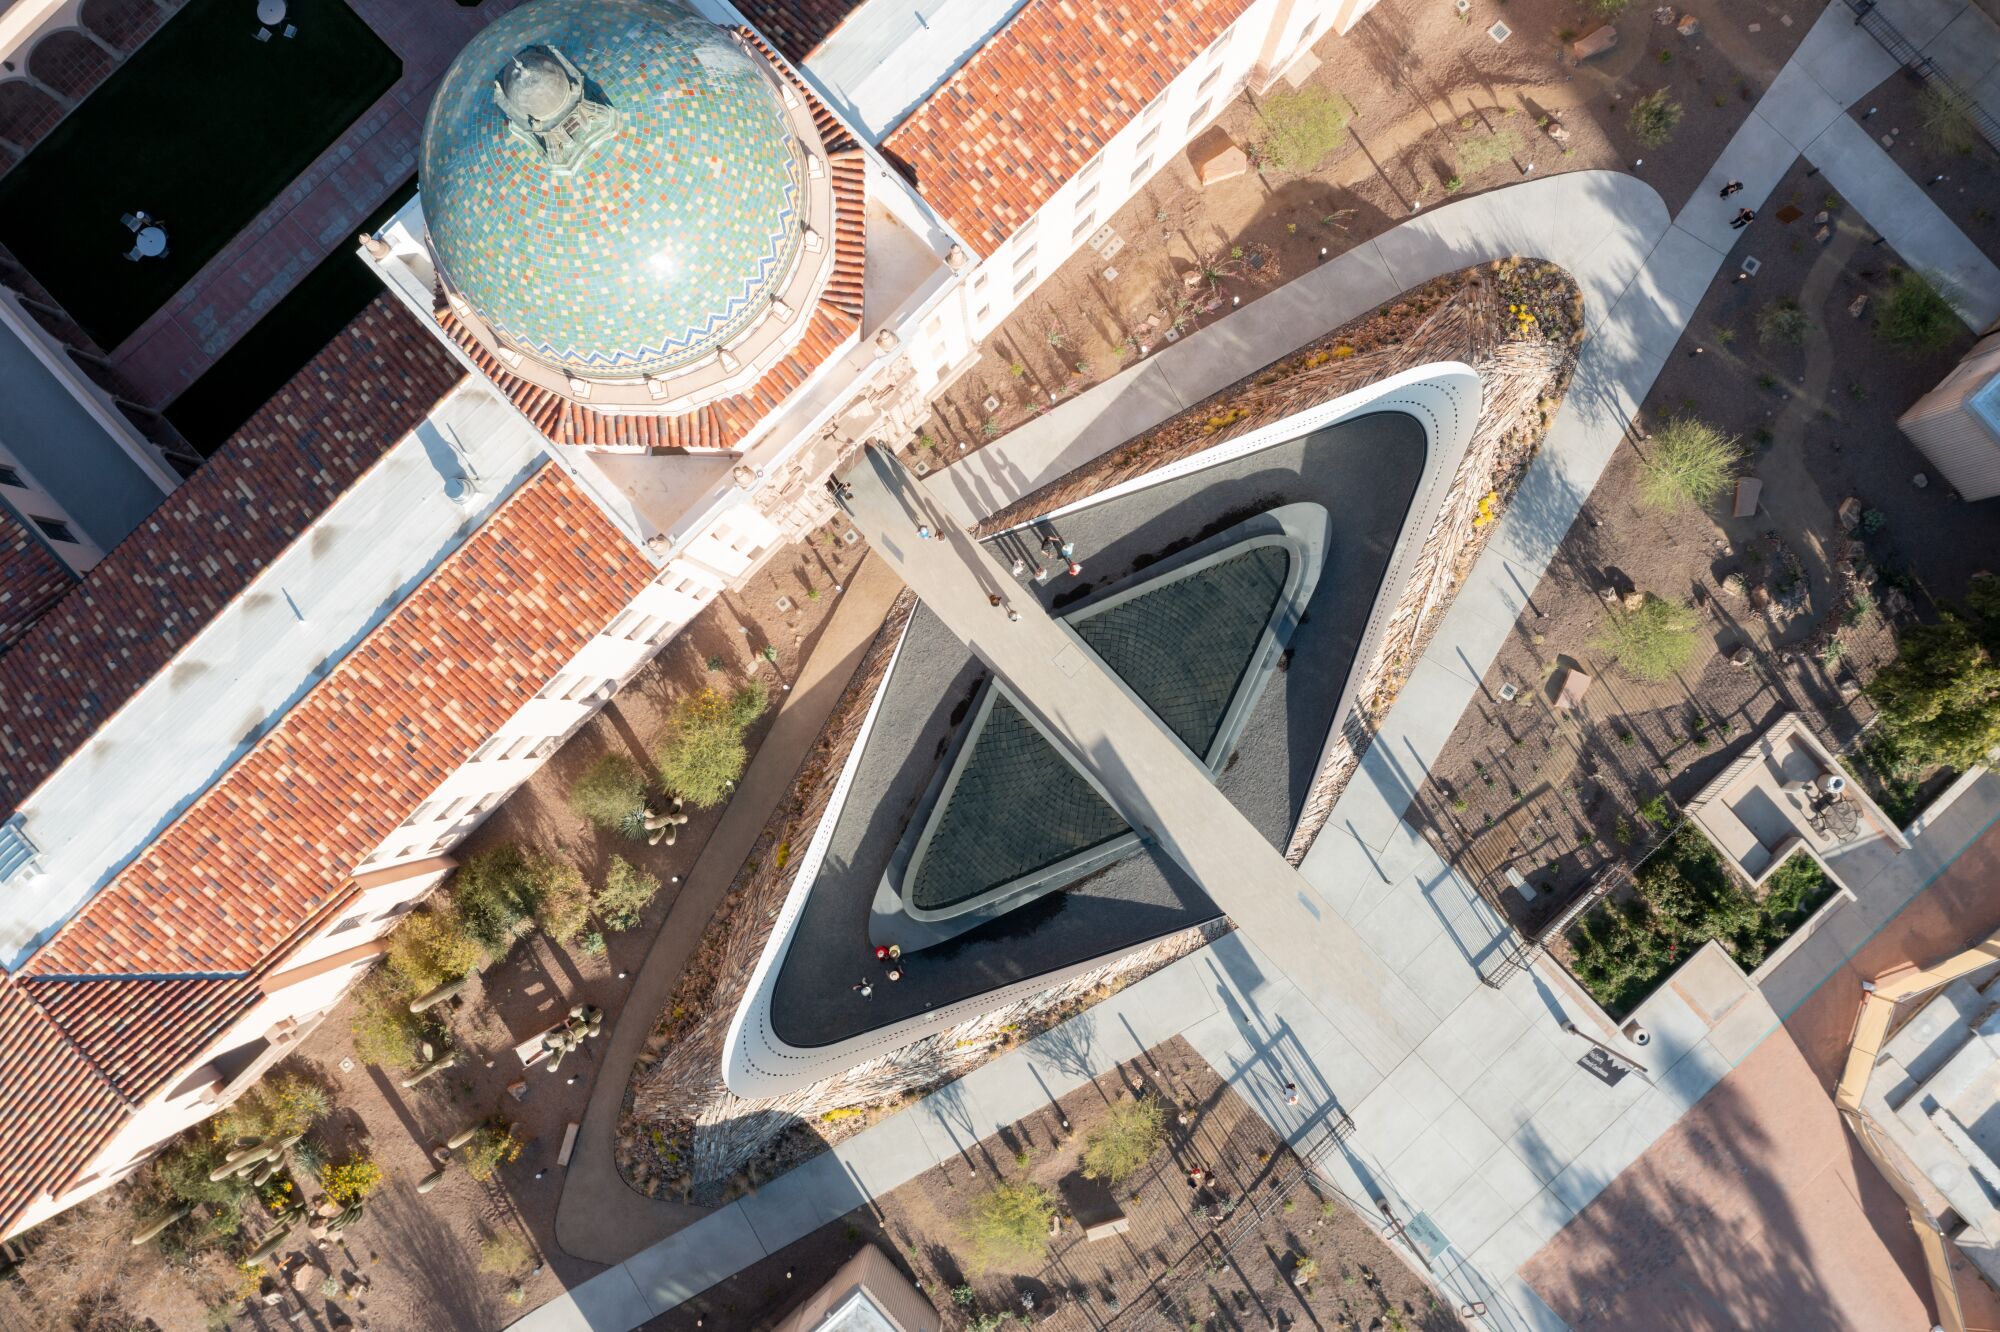 An overhead shot of a building with a dome and two triangular shapes in the land.